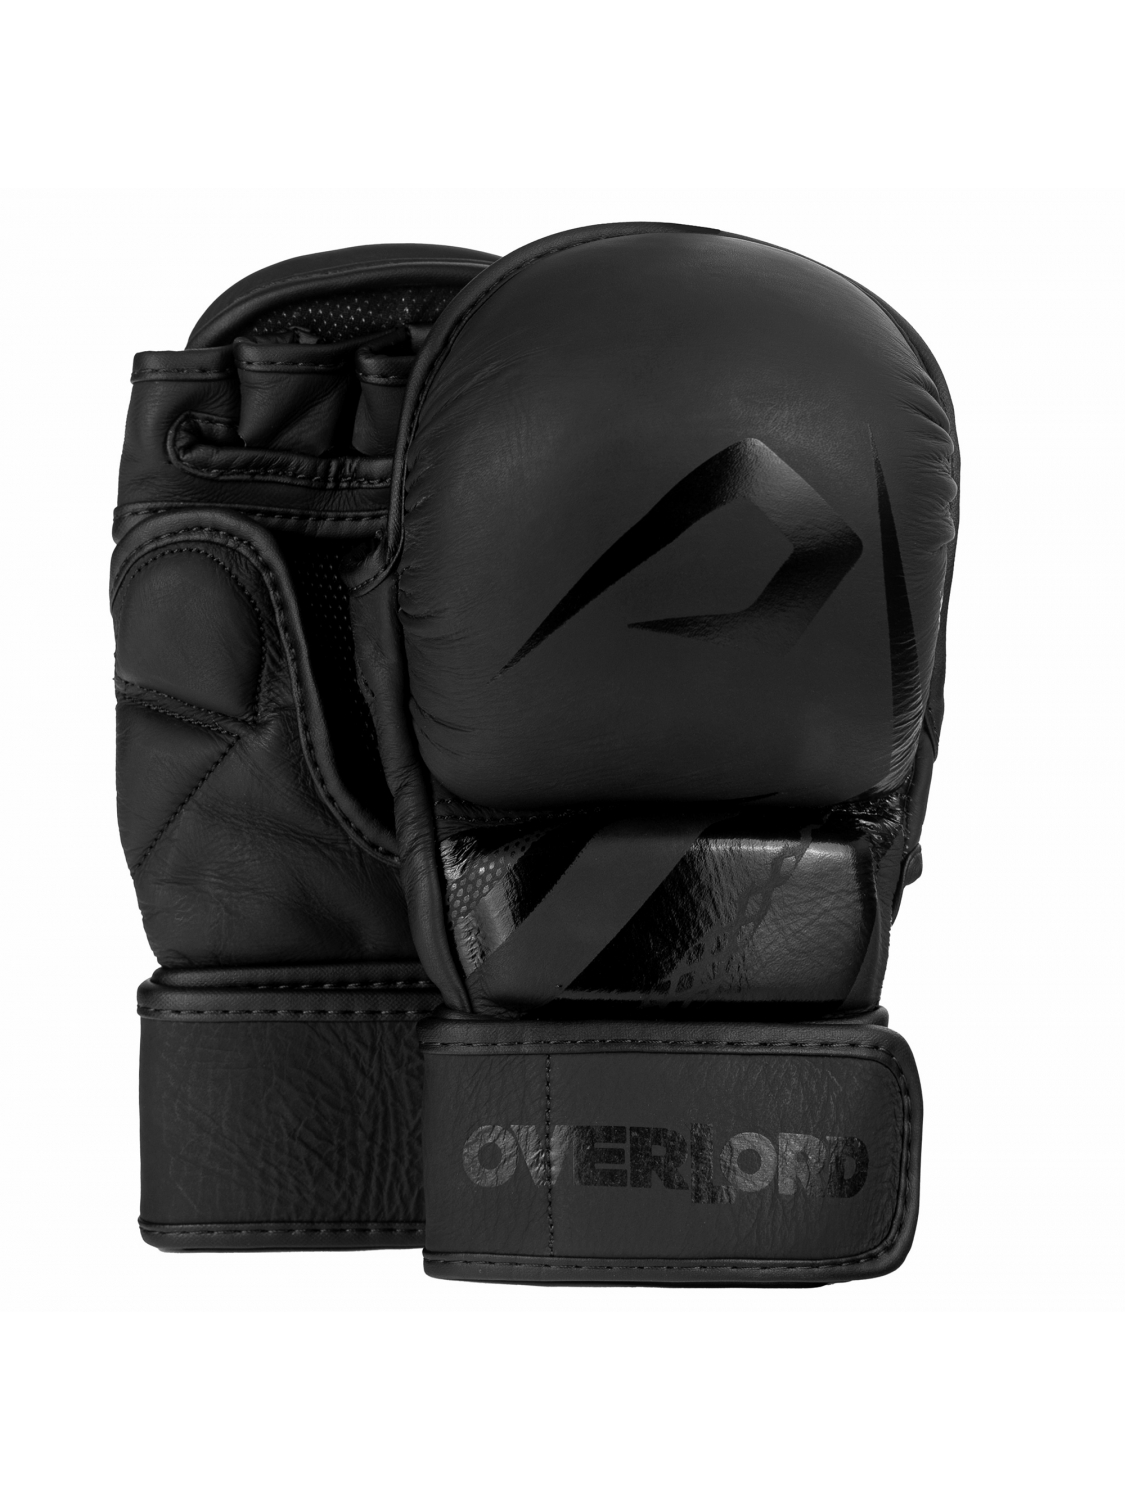 Overlord MMA Gloves Sparring